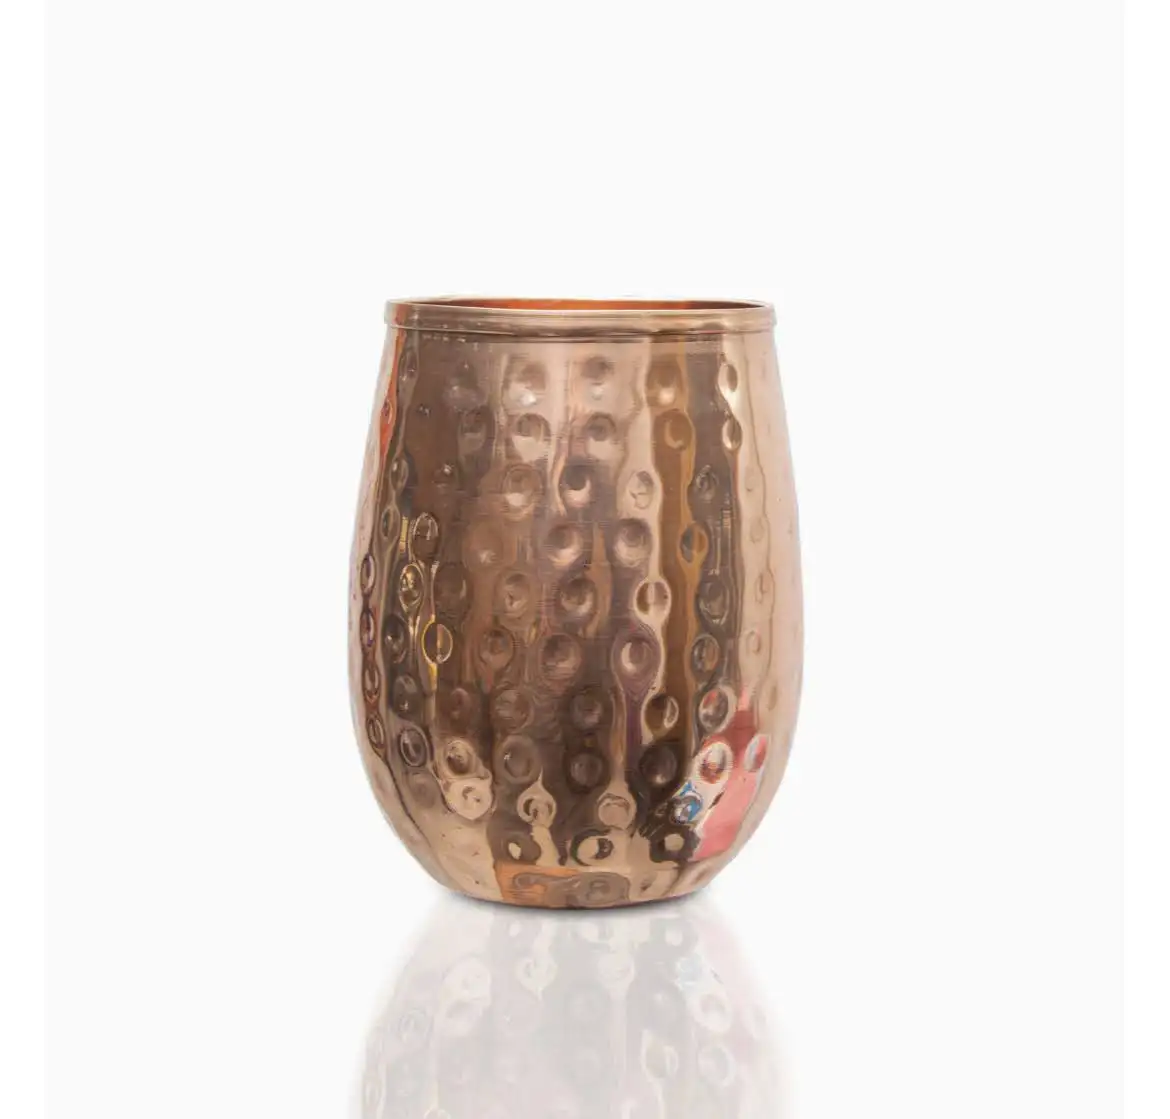 Hot Selling Hammered Pure Moscow Hammered Brown Finished Cooper Mule Mug Gift Mug from India